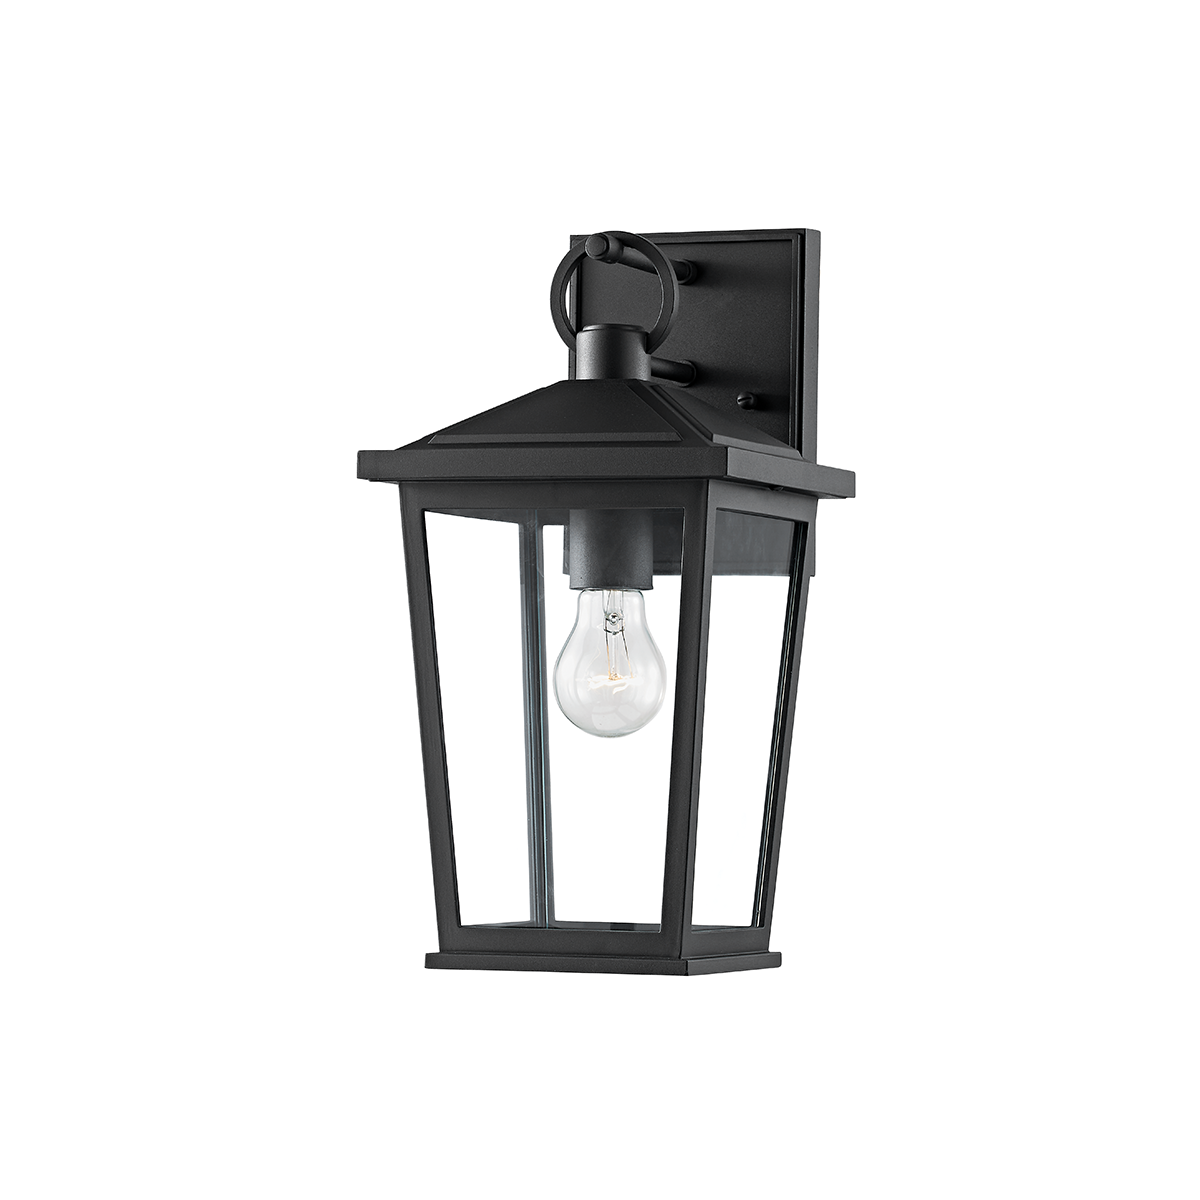 Troy SOREN 1 LIGHT SMALL EXTERIOR WALL SCONCE B8901 Outdoor l Wall Troy Lighting   